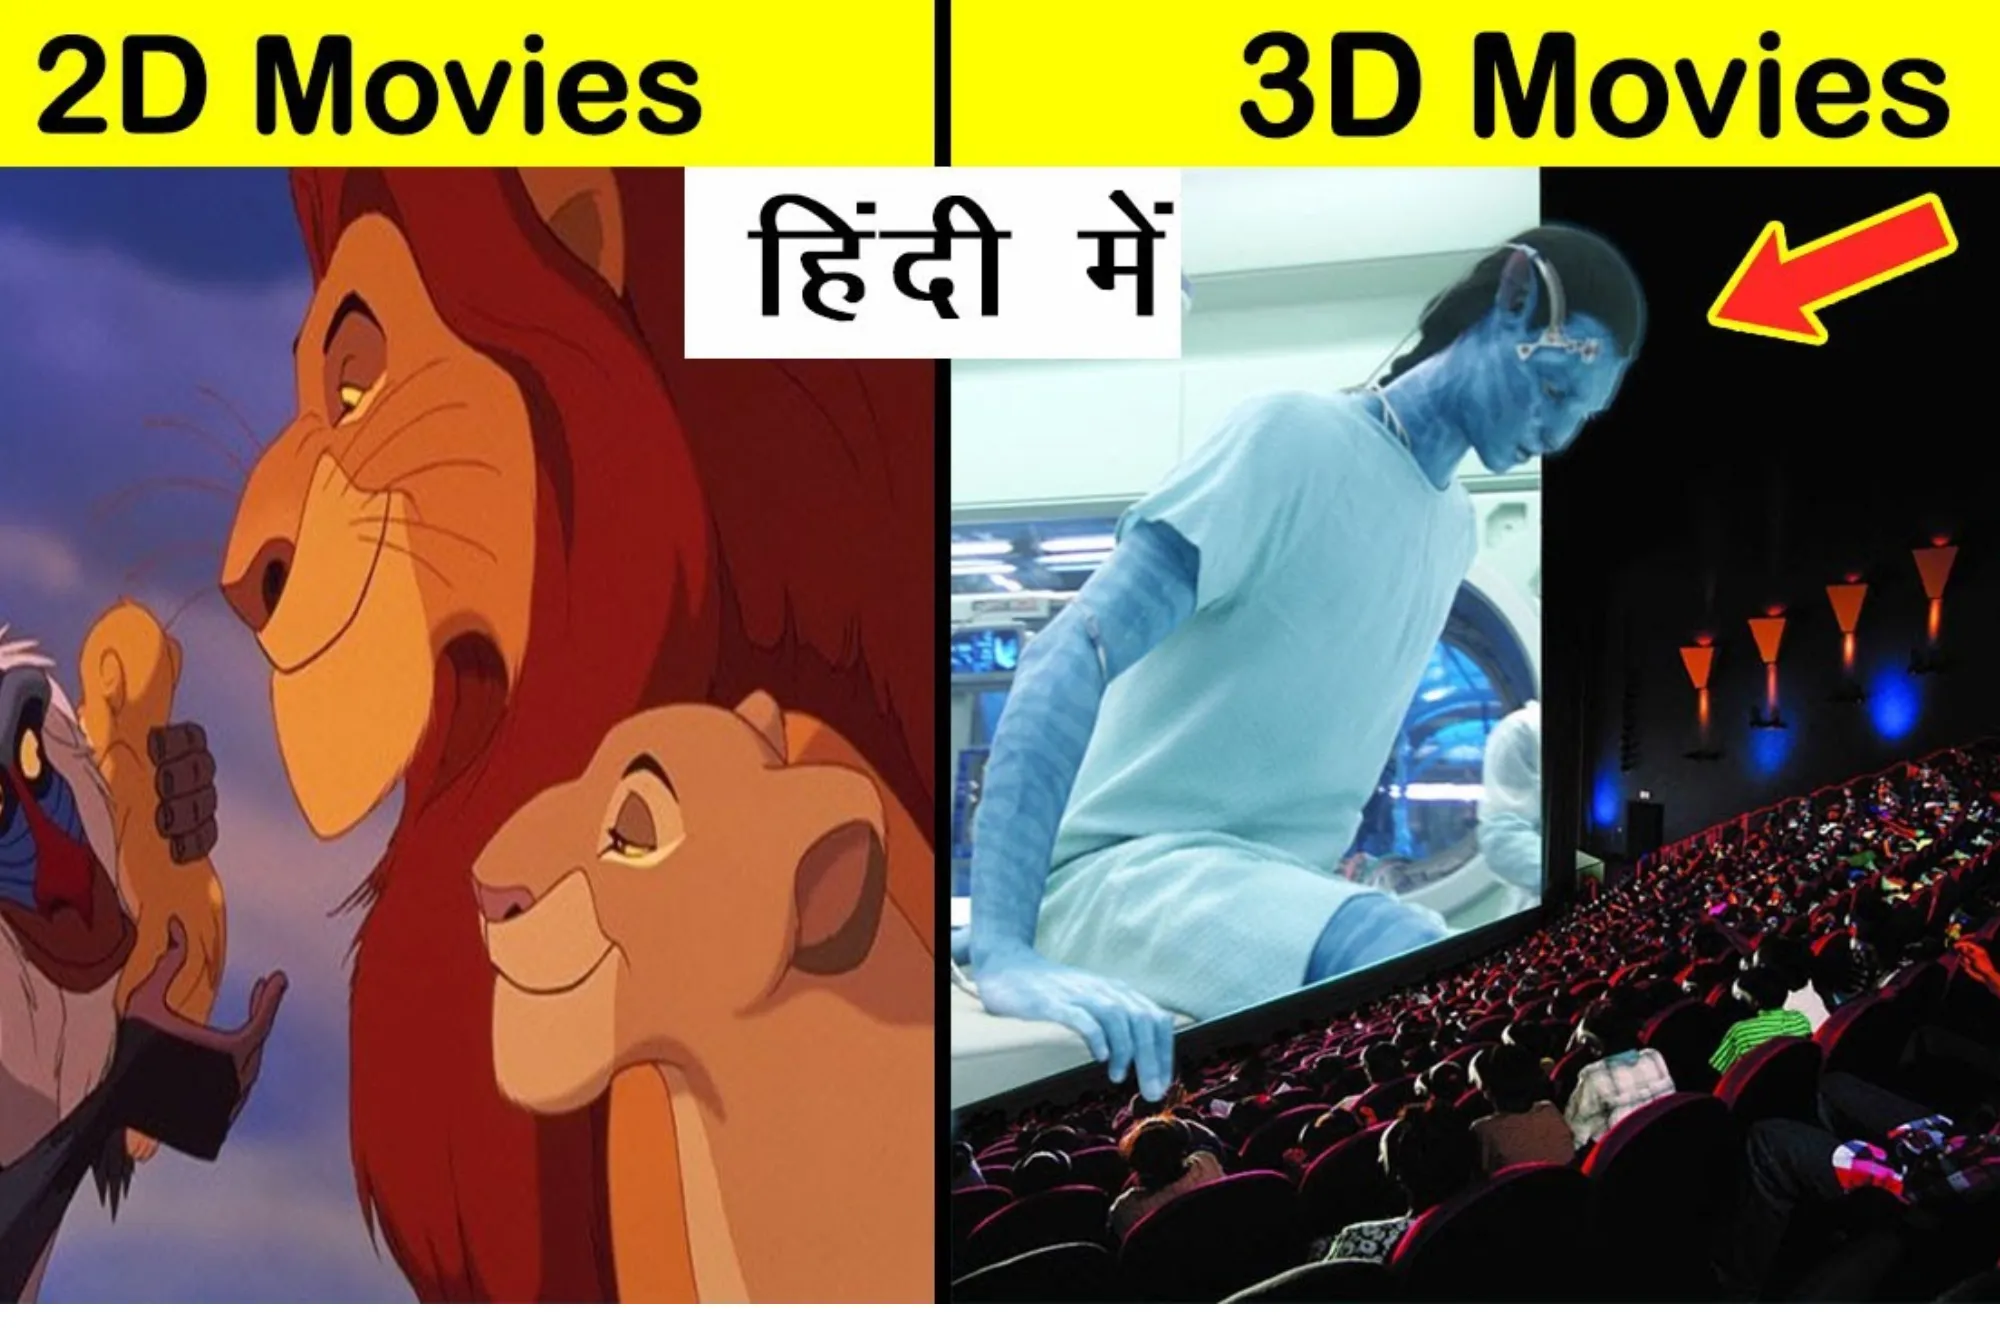 What is 2d in Movies